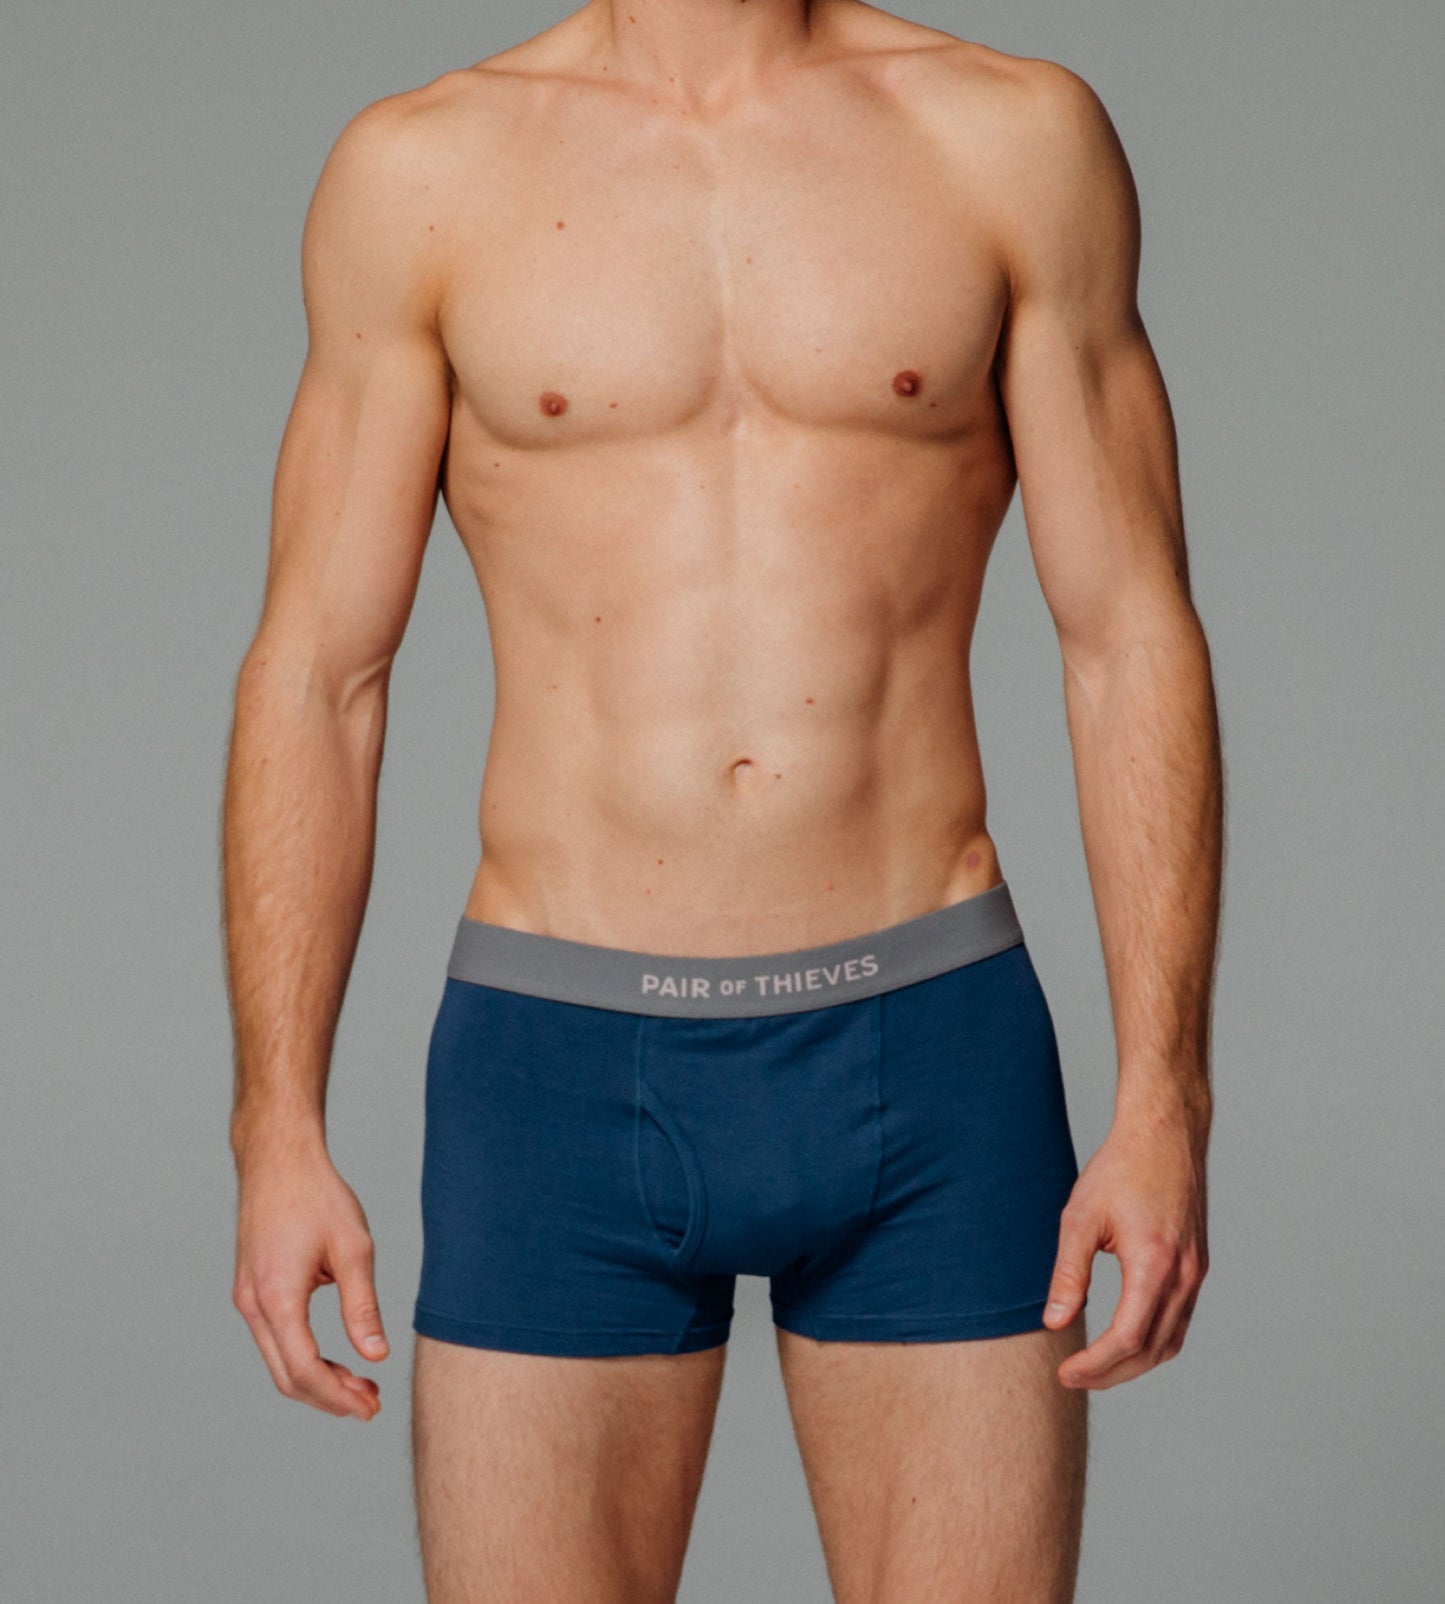 Navy Blue SuperSoft Trunks contains colors Lights late gray, Black, Rosy brown, Sienna, Midnight blue, Peru, Tan, Saddle brown, Indian red, Dim gray